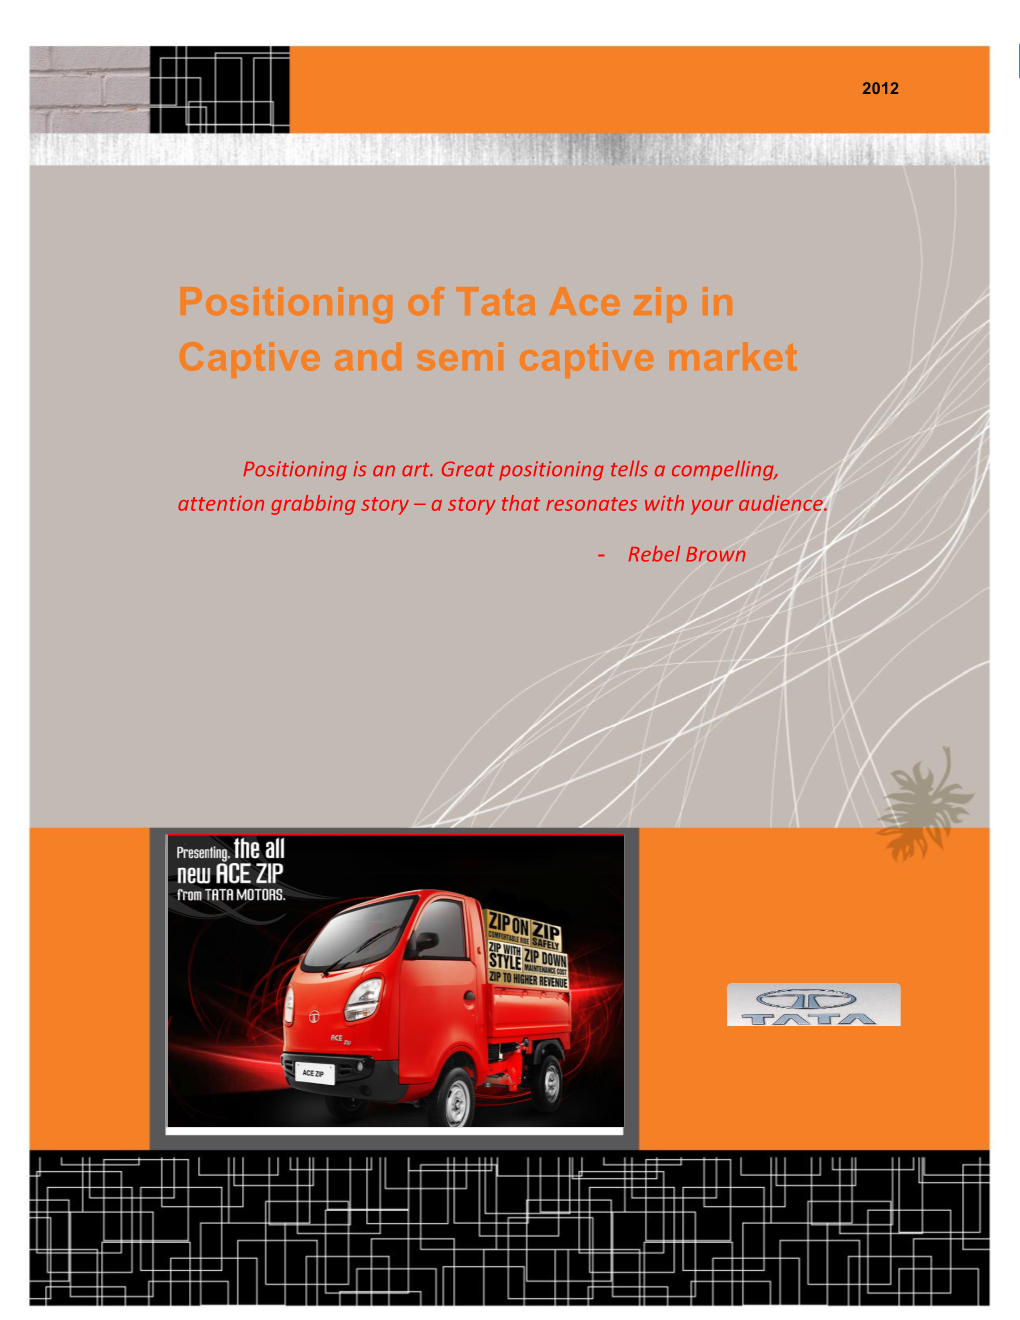 Positioning of Tata Ace Zip in Captive and Semi Captive Market